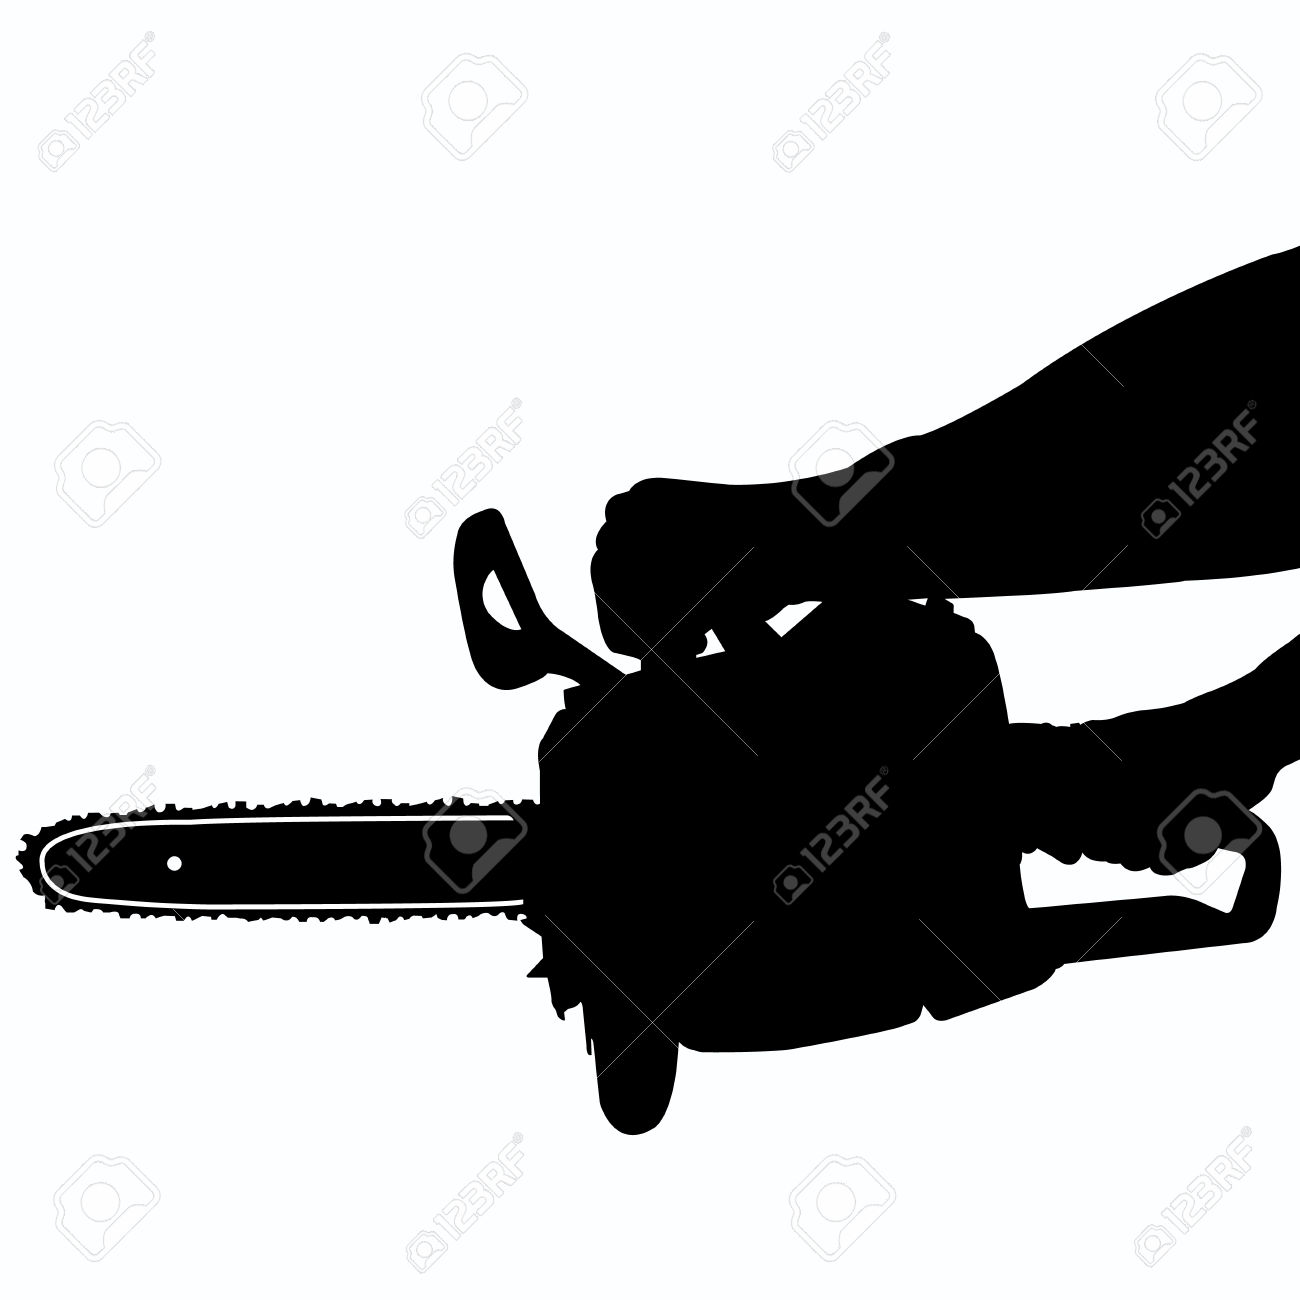 Hand Holding Chainsaws Silhouette Vector Royalty Free Cliparts.